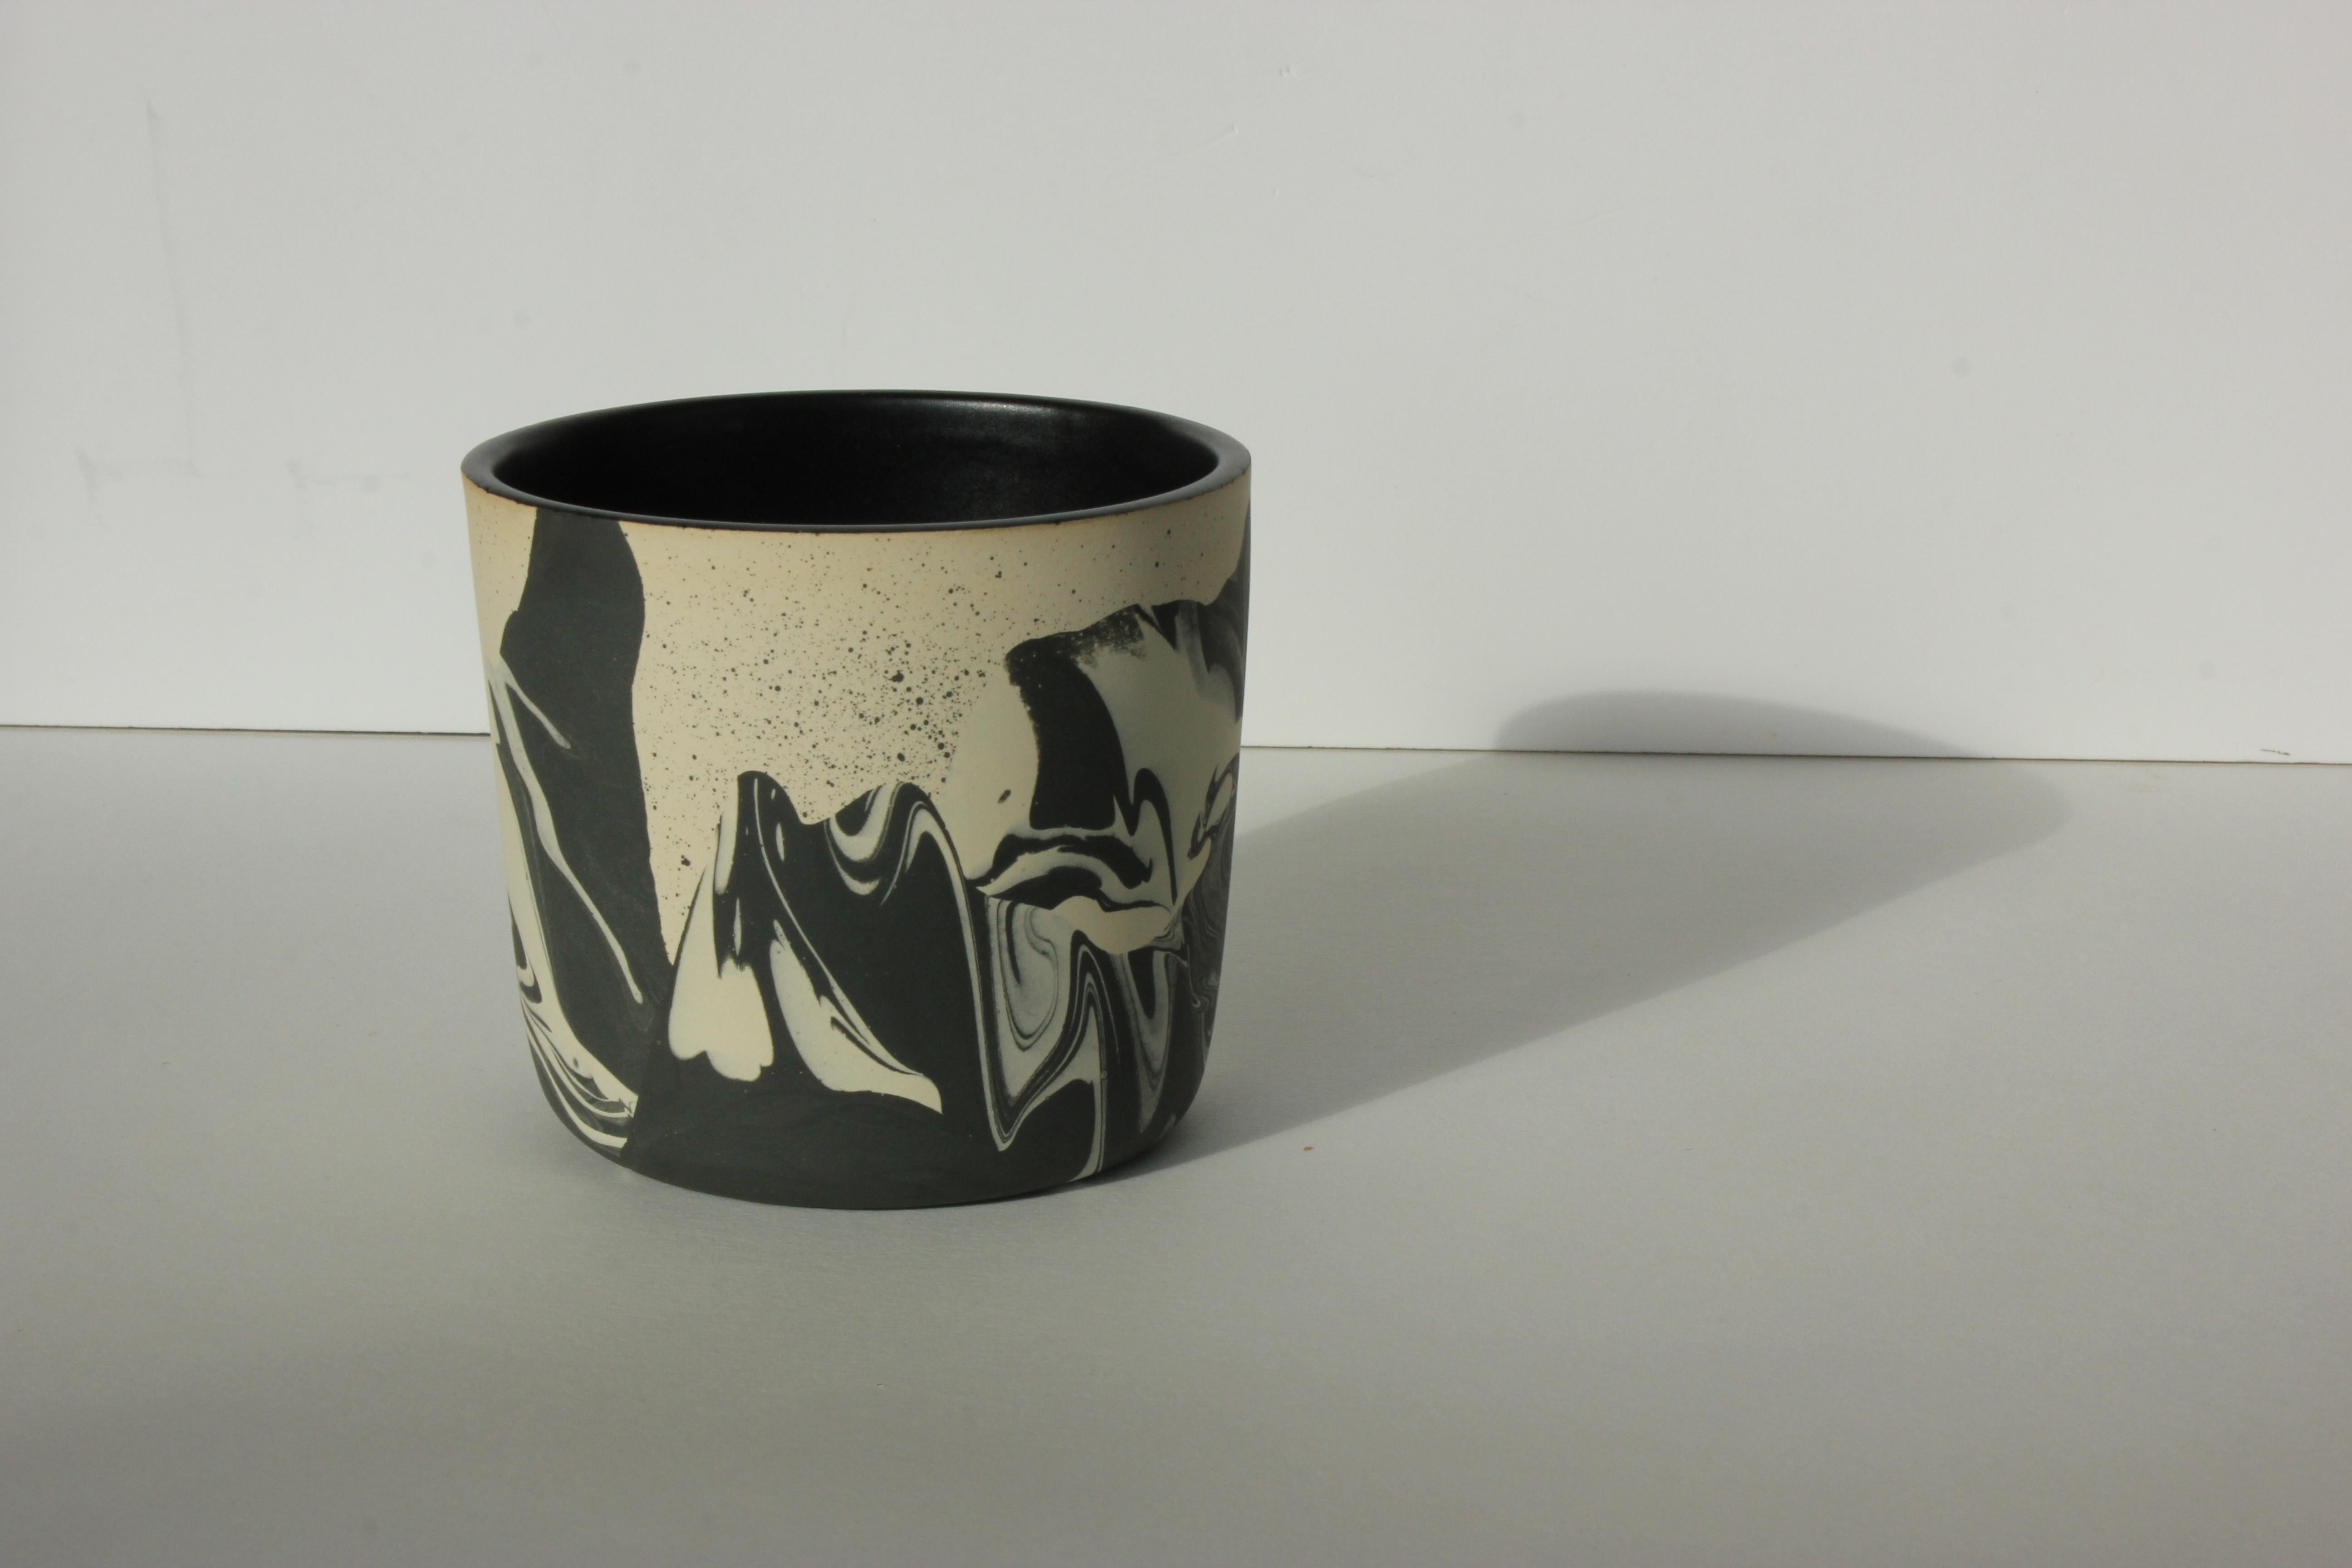 Handmade ceramic stoneware cup. Marbled raw colored clay exterior with satin black glaze interior. Available in other options. Handmade by Malka Dina in Brooklyn, NY.
Due to the handmade nature of this item, each piece will be slightly unique and